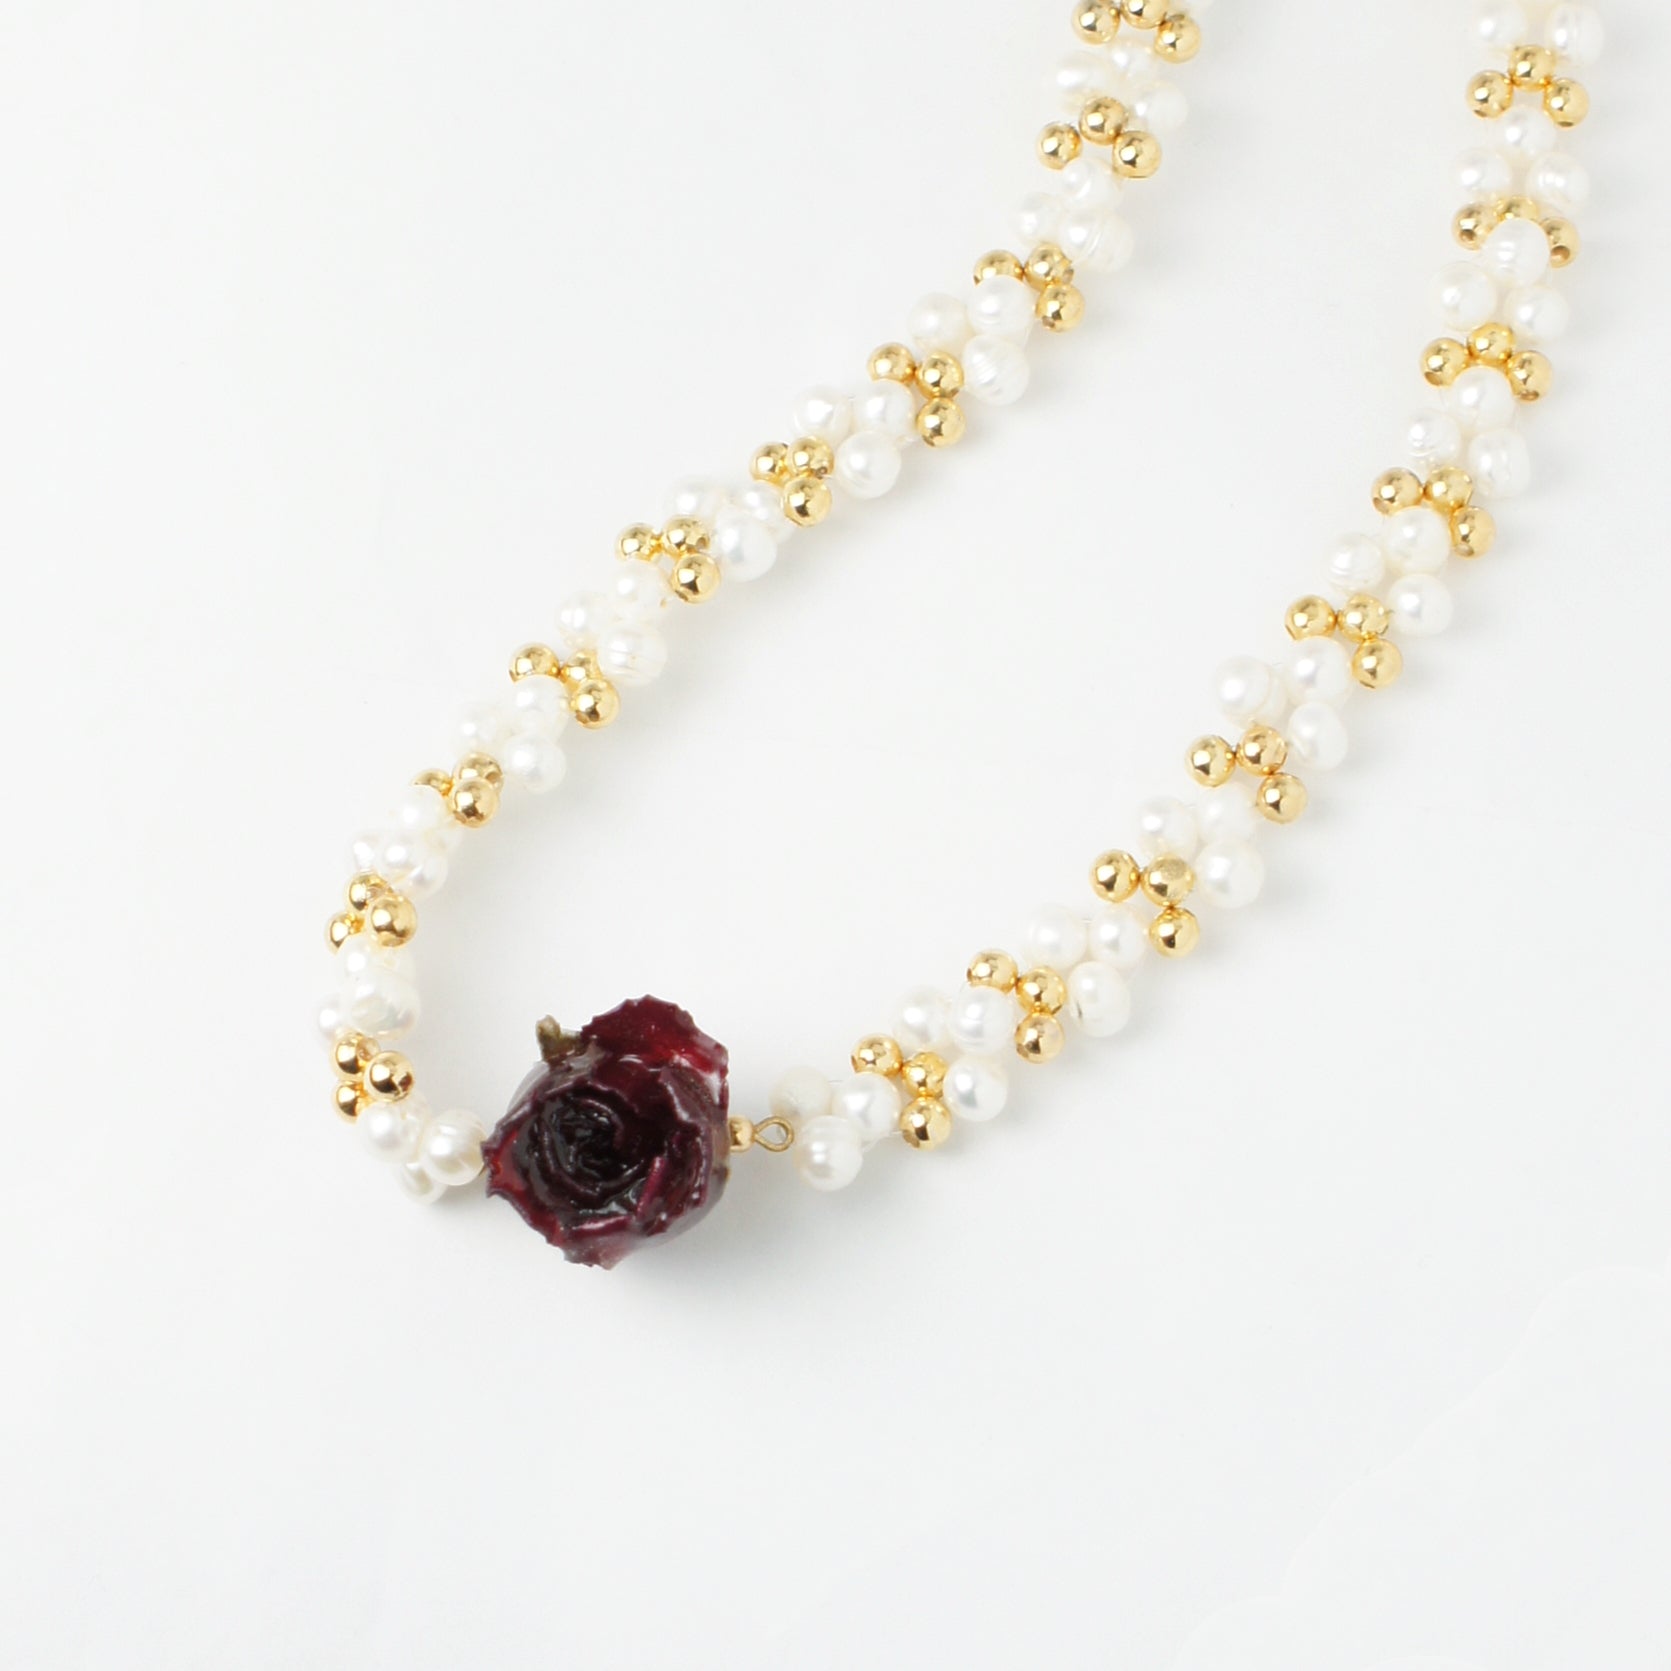 *REAL FLOWER* Grande Amore Braided Freshwater Pearl Choker Necklace with Red Rosebud